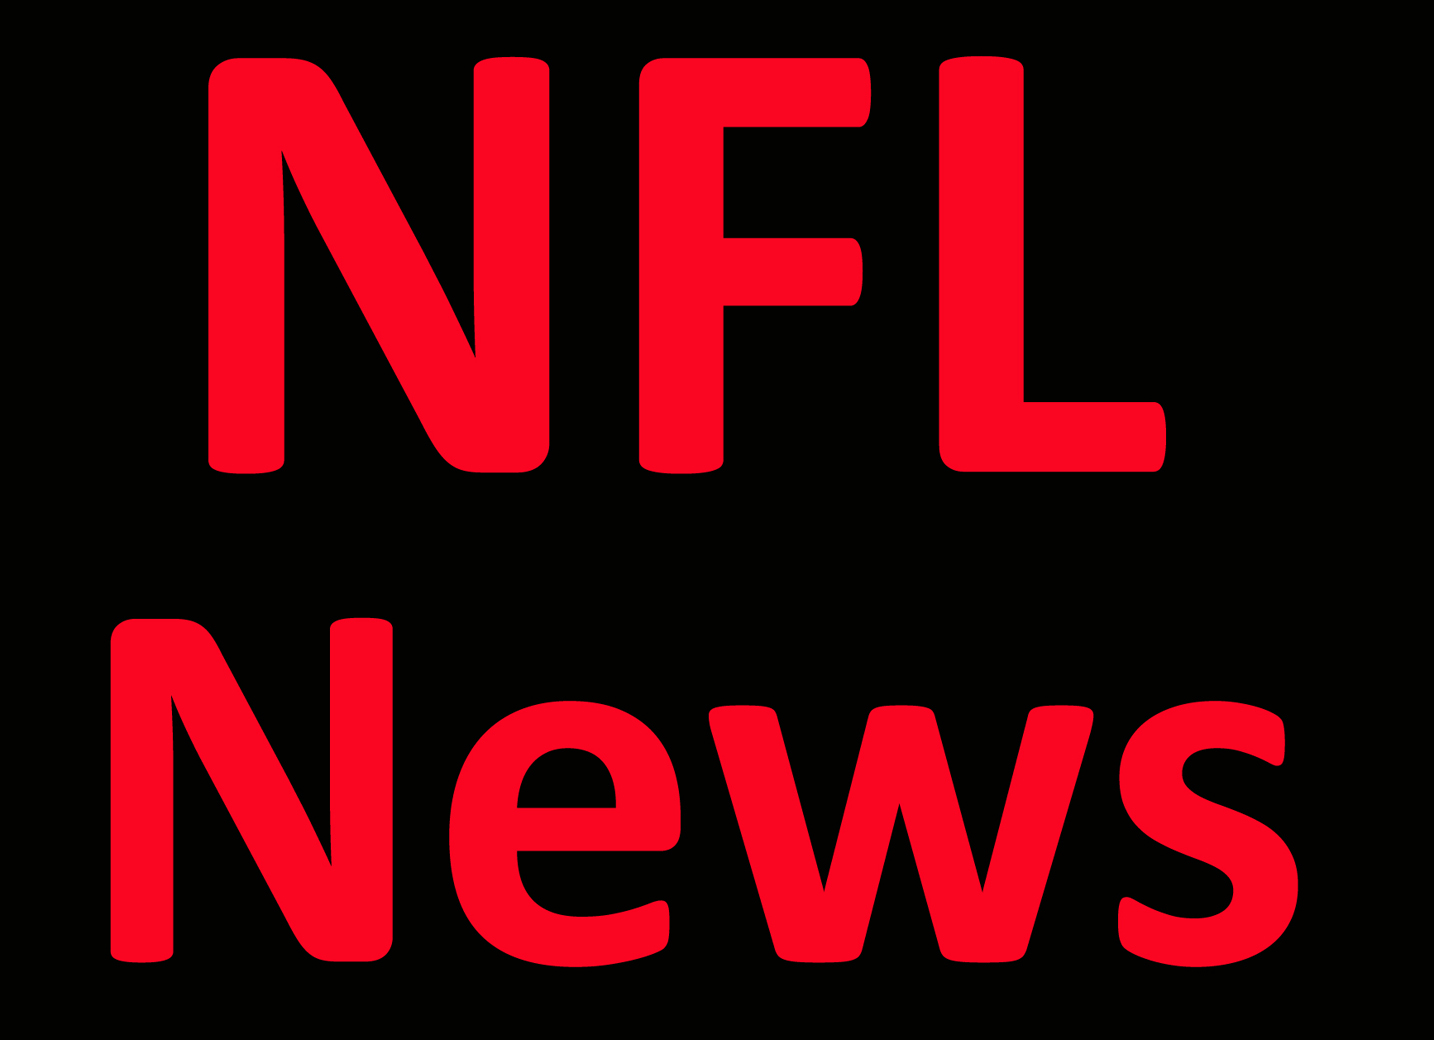 NFL News: Rating the NFL’s 32 biggest surprises so far: Which will continue, and which are a mirage? Per Report